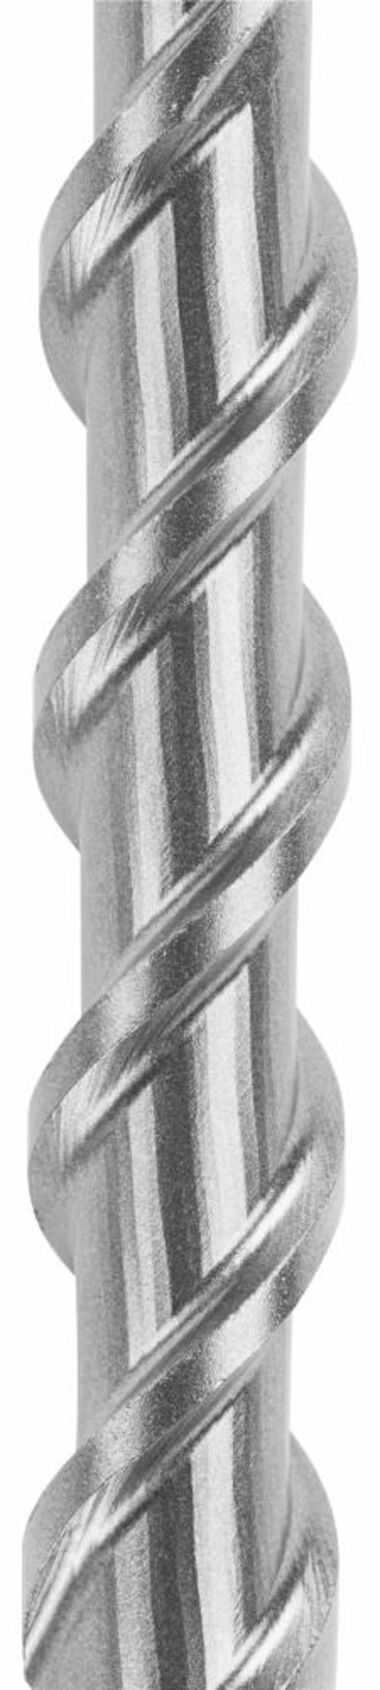 Bosch 3/4 In. x 6 In. x 8 In. SDS-plus Bulldog Xtreme Carbide Rotary Hammer Drill Bit, large image number 6